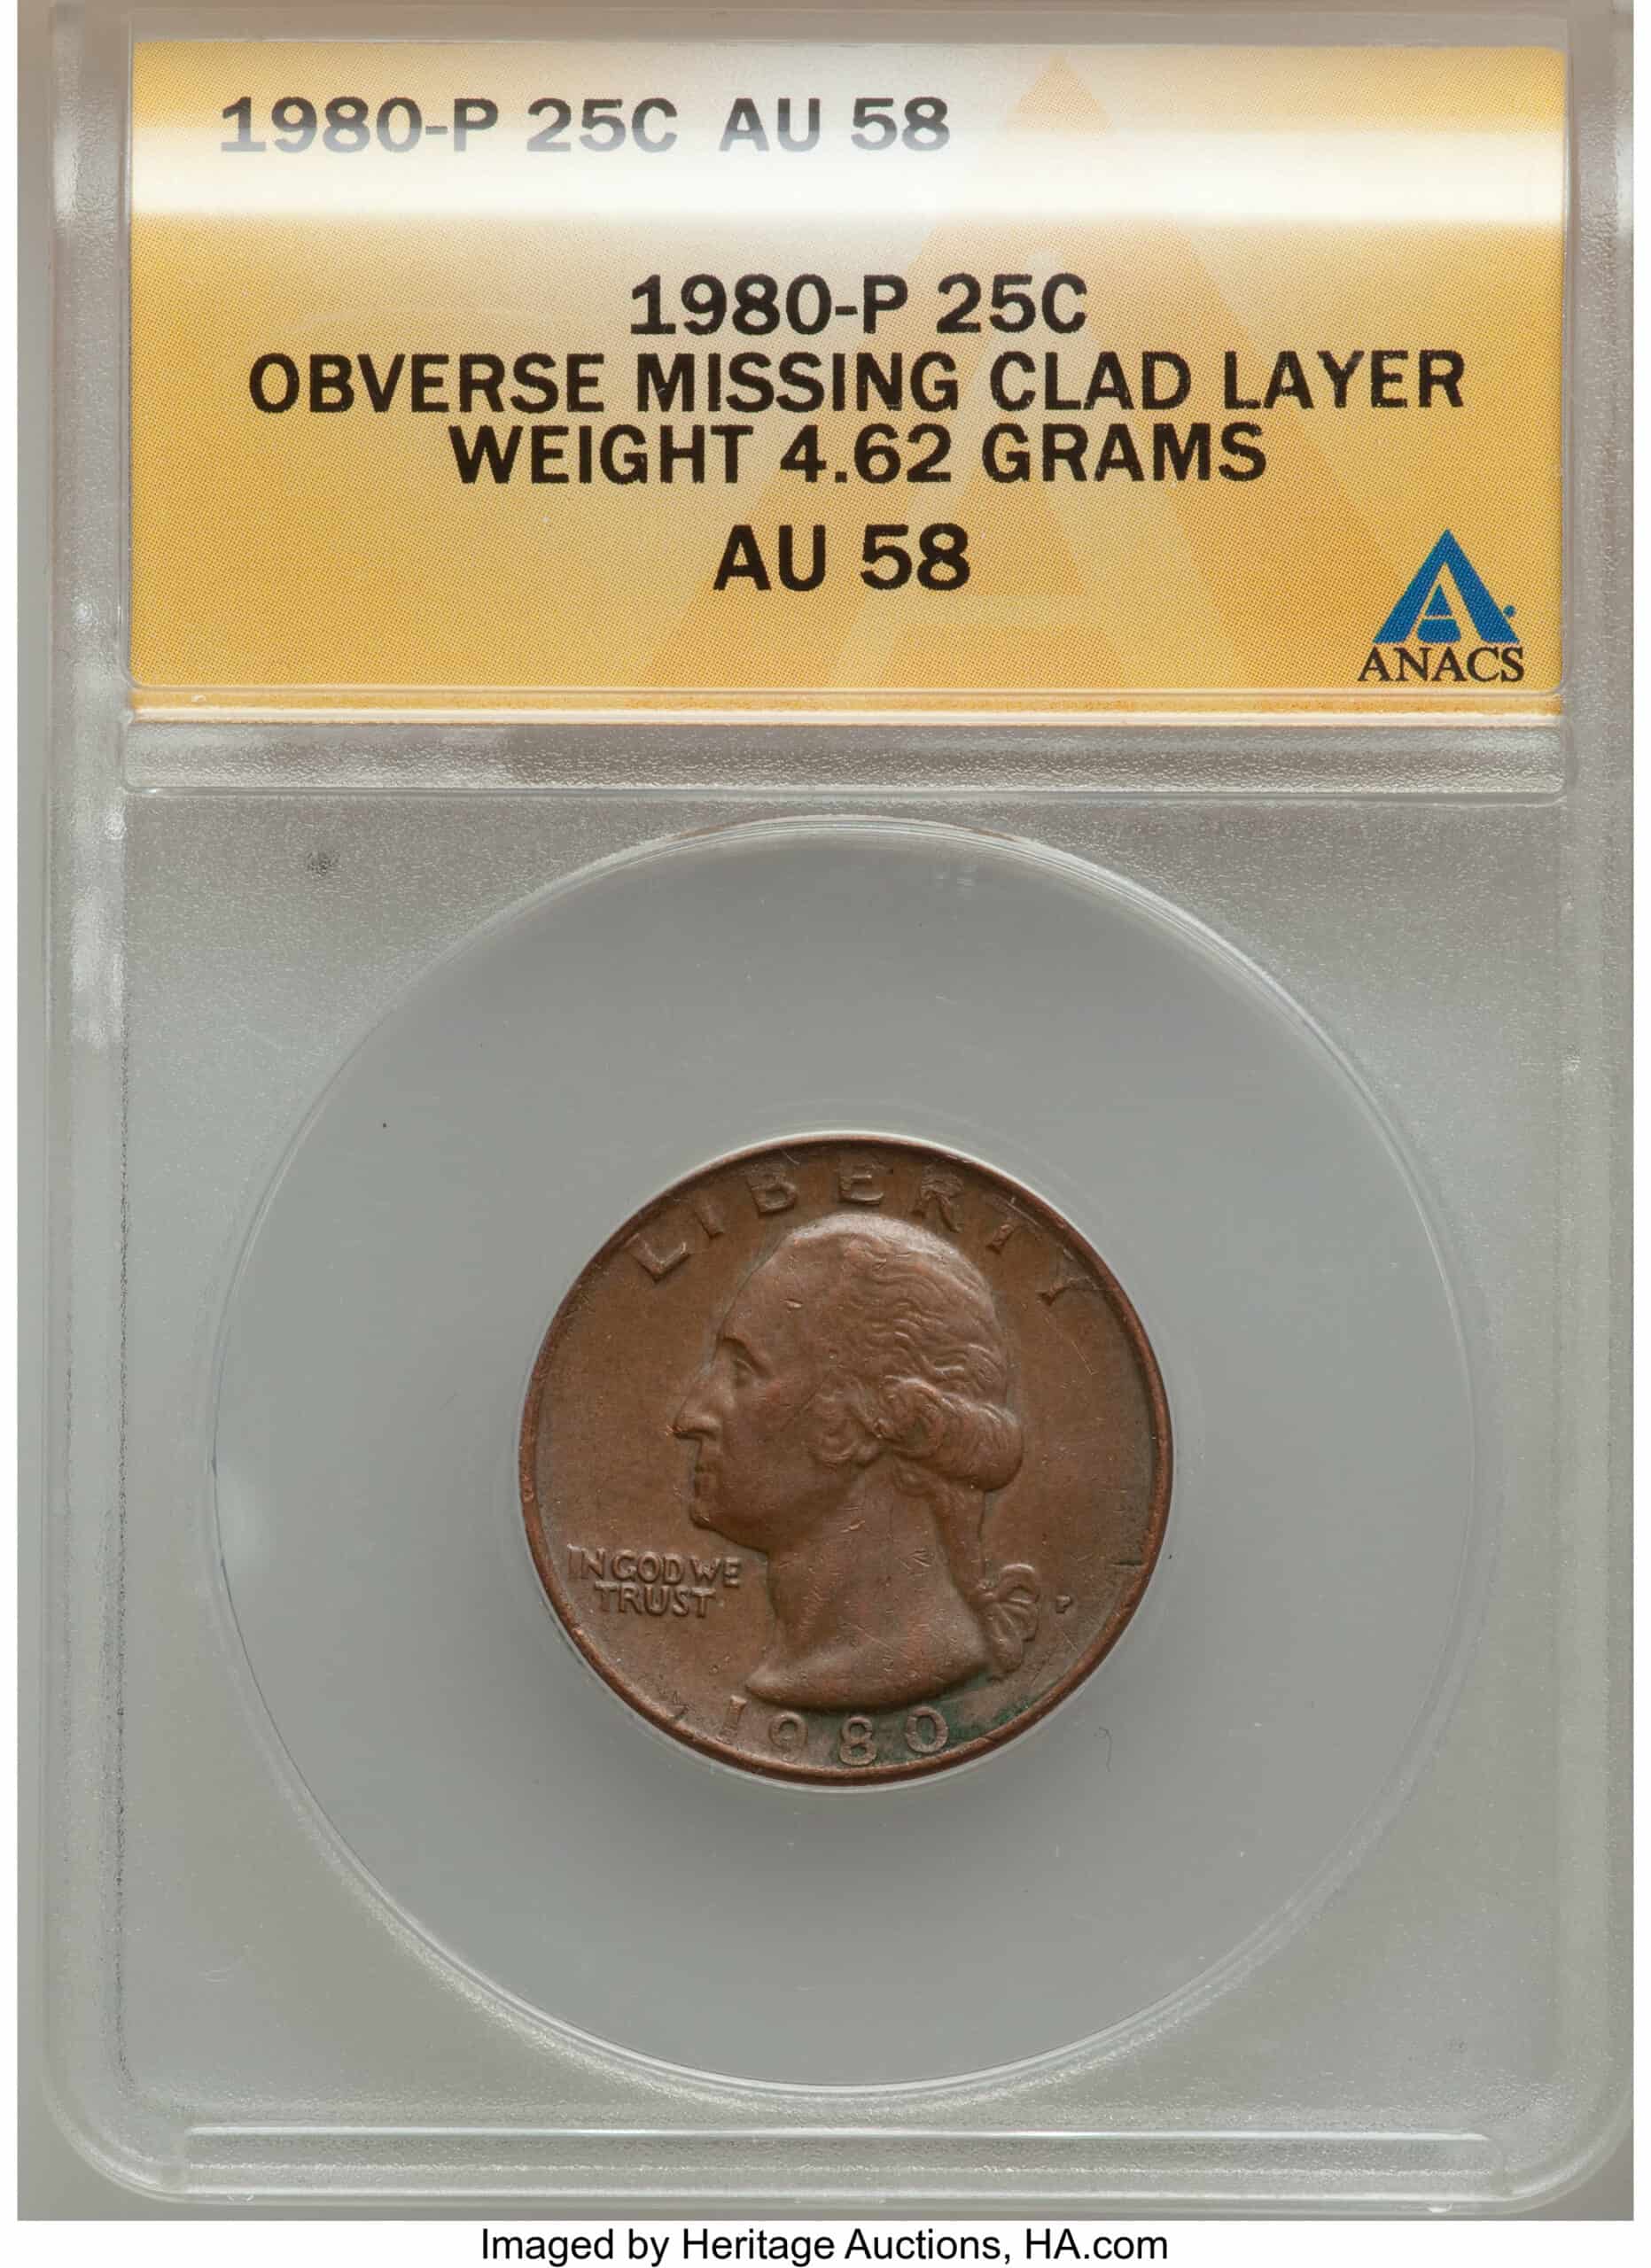 1980 Quarter with Missing Clad Layer